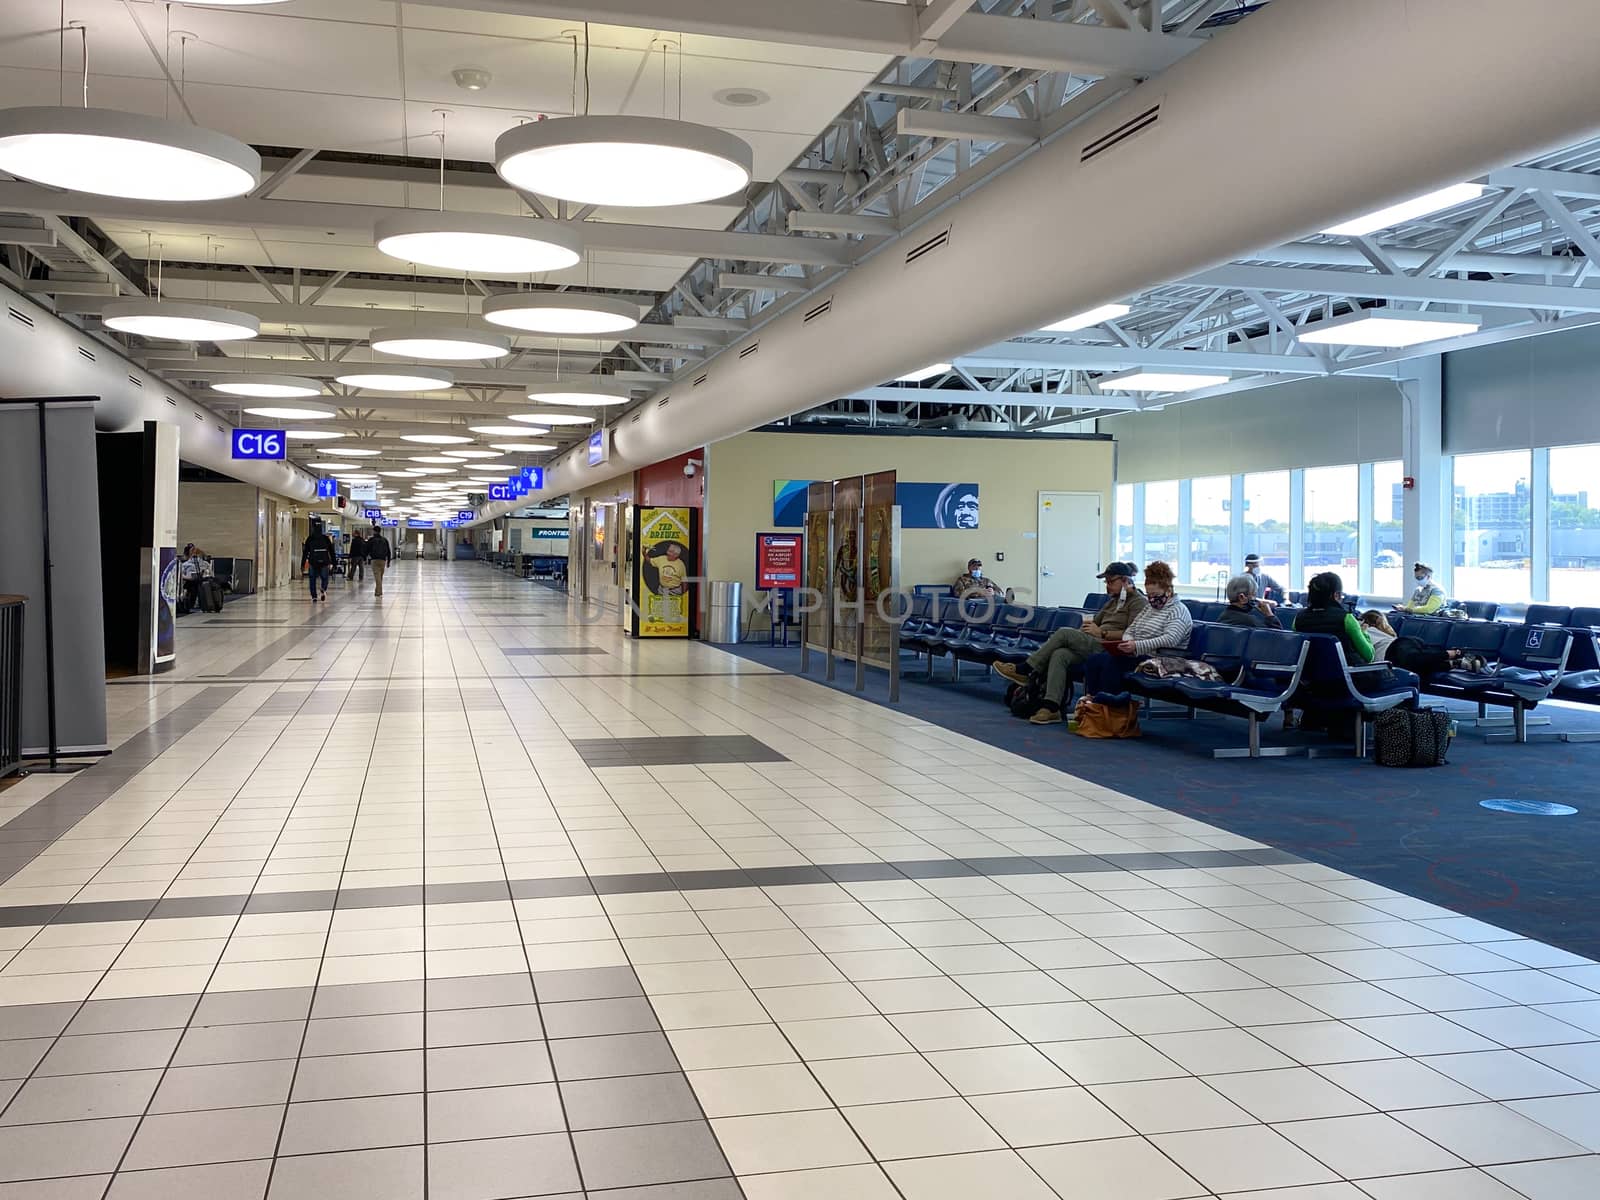 St. Louis, MO/USA - 10/4/20: The interior gate area at the St. Louis International Airport STL.